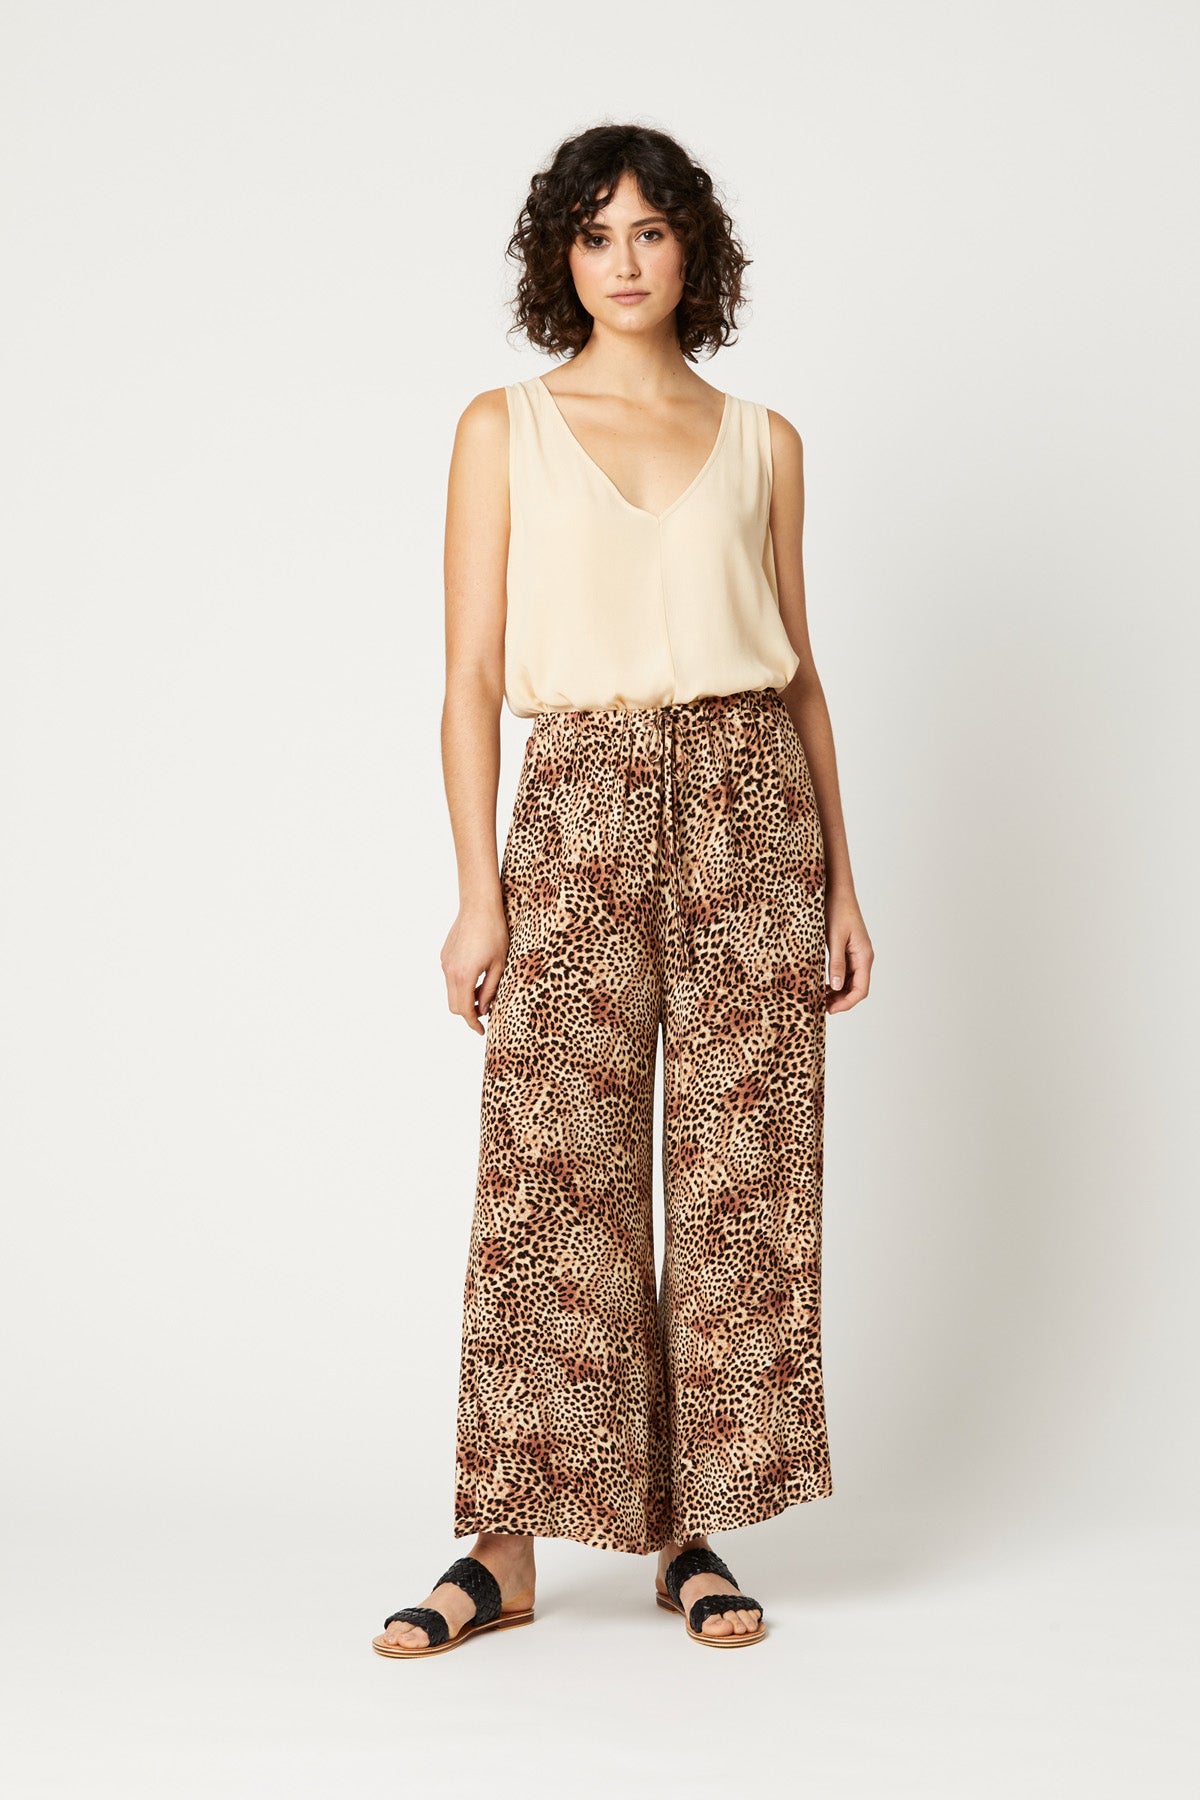 Lioness Pant - Cheetah - eb&ive Clothing - Pant Relaxed Casual